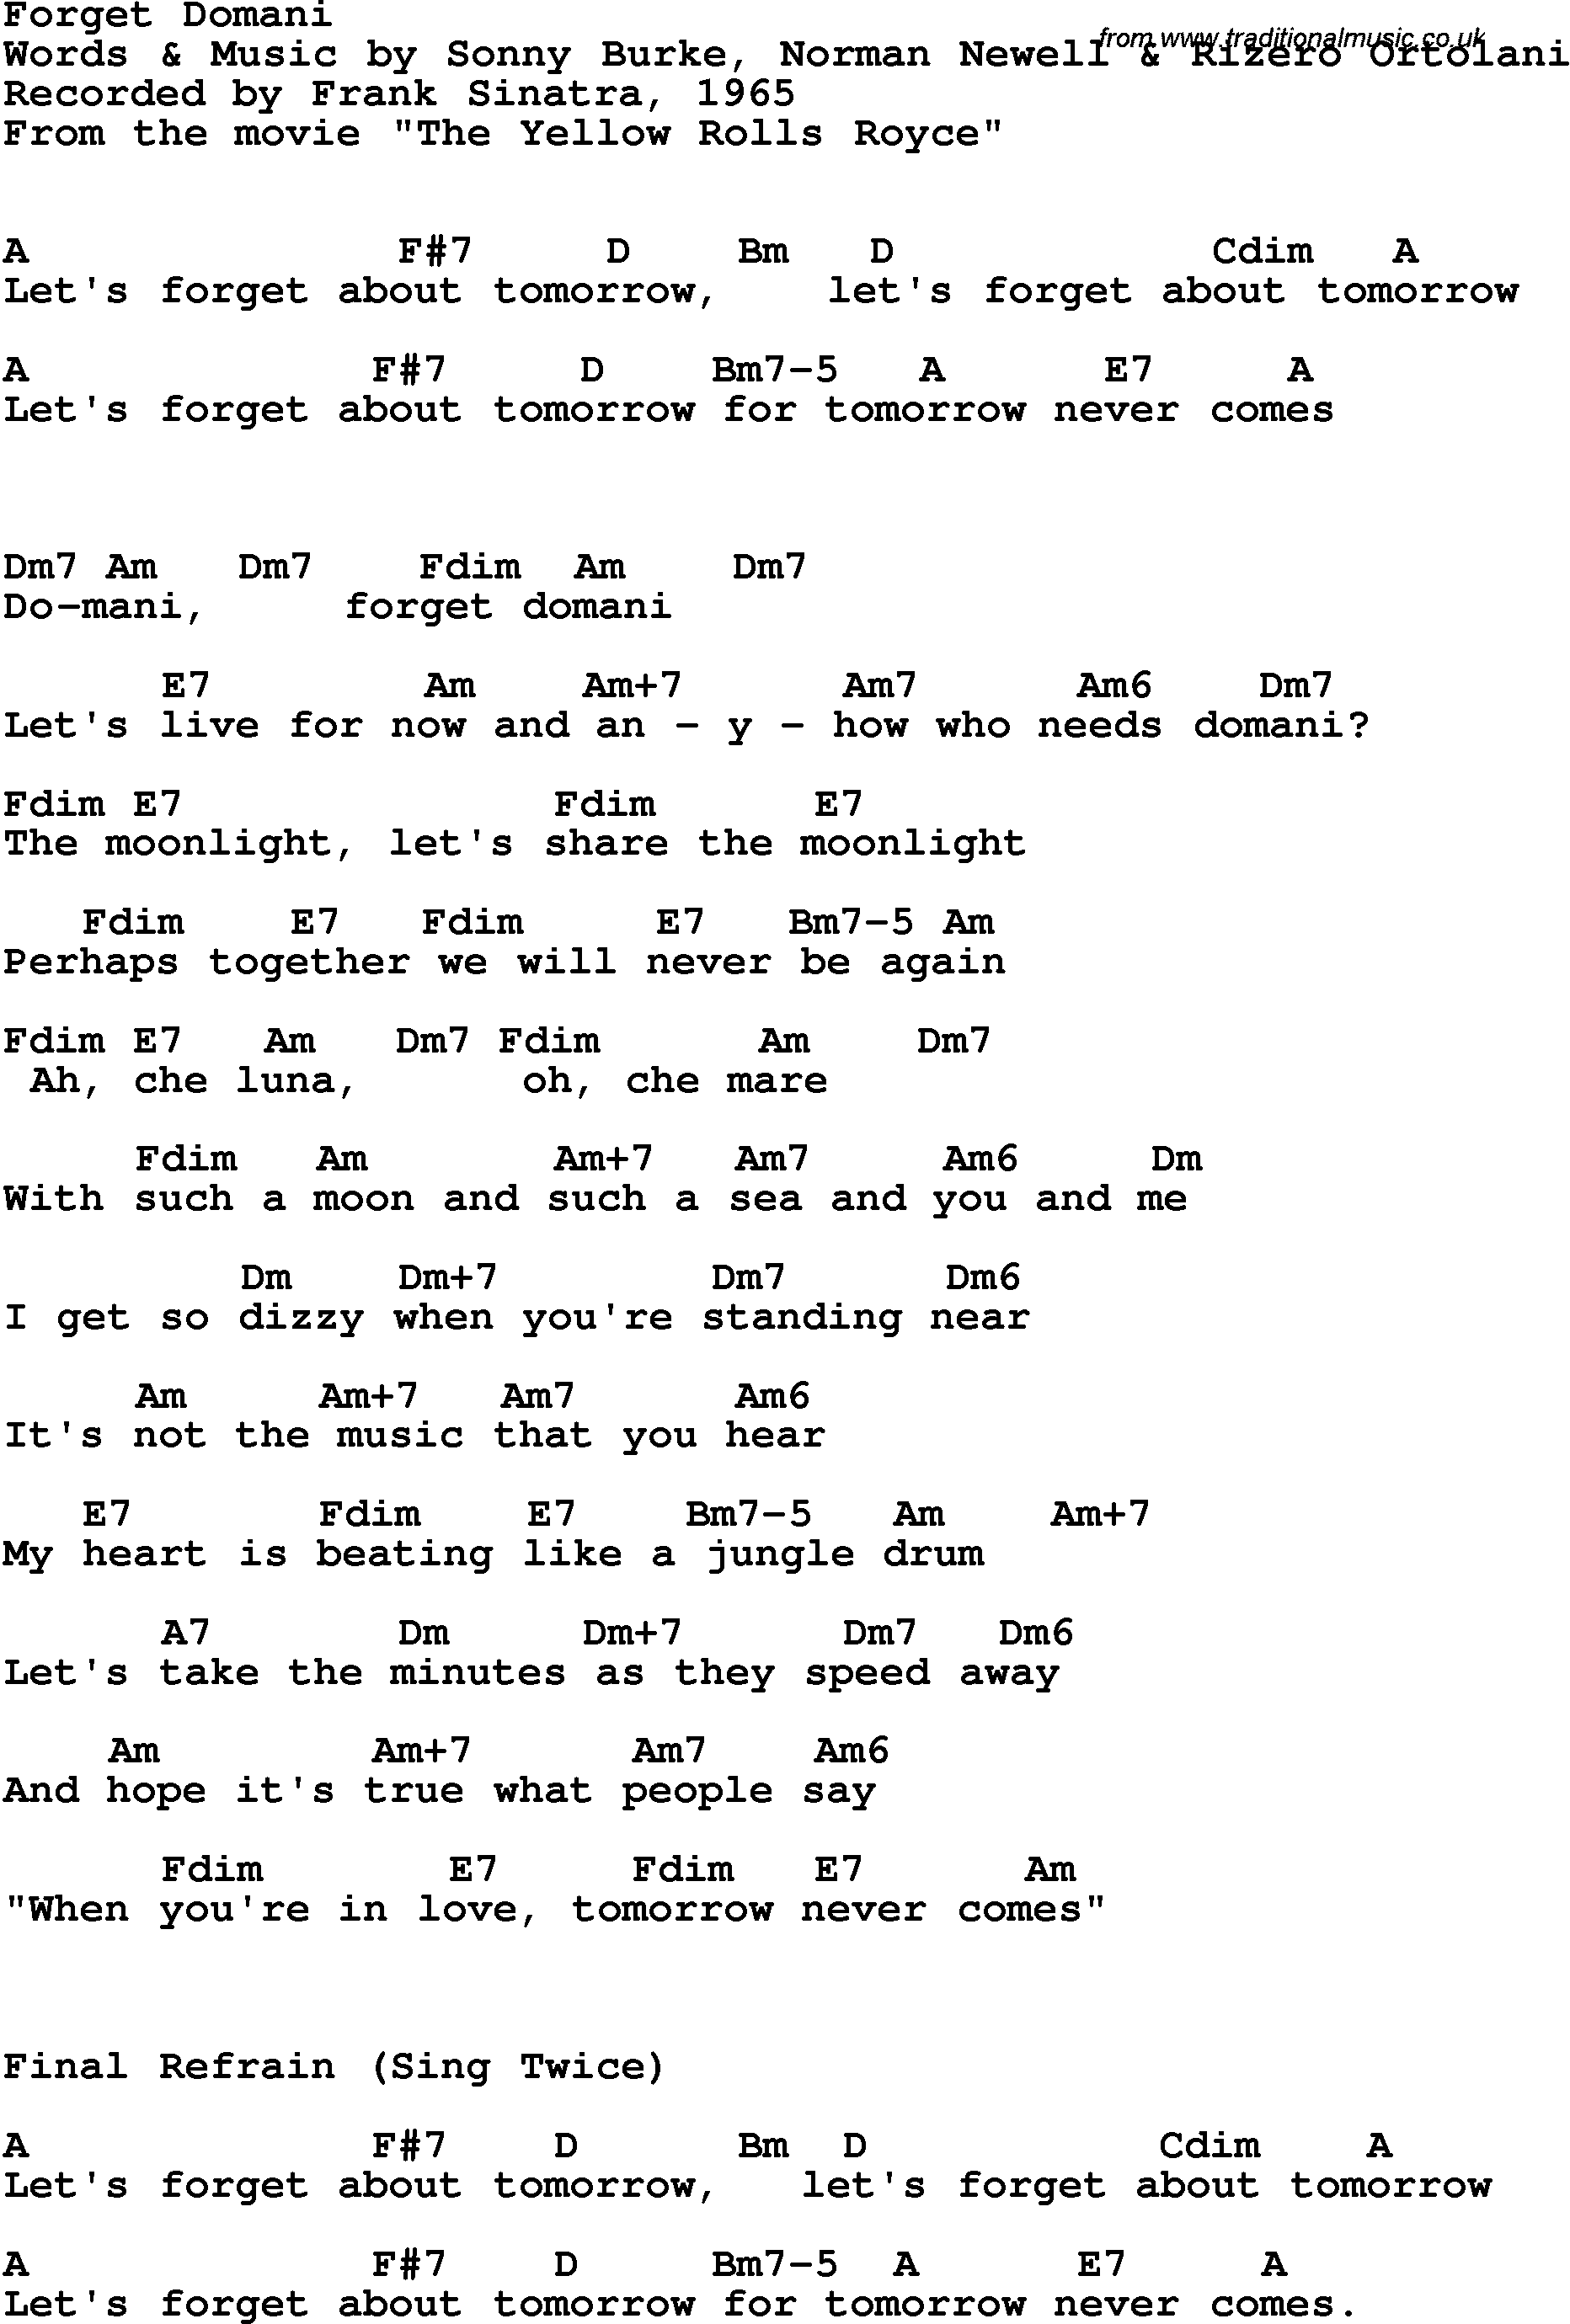 Song Lyrics with guitar chords for Forget Domani- Frank Sinatra 1965